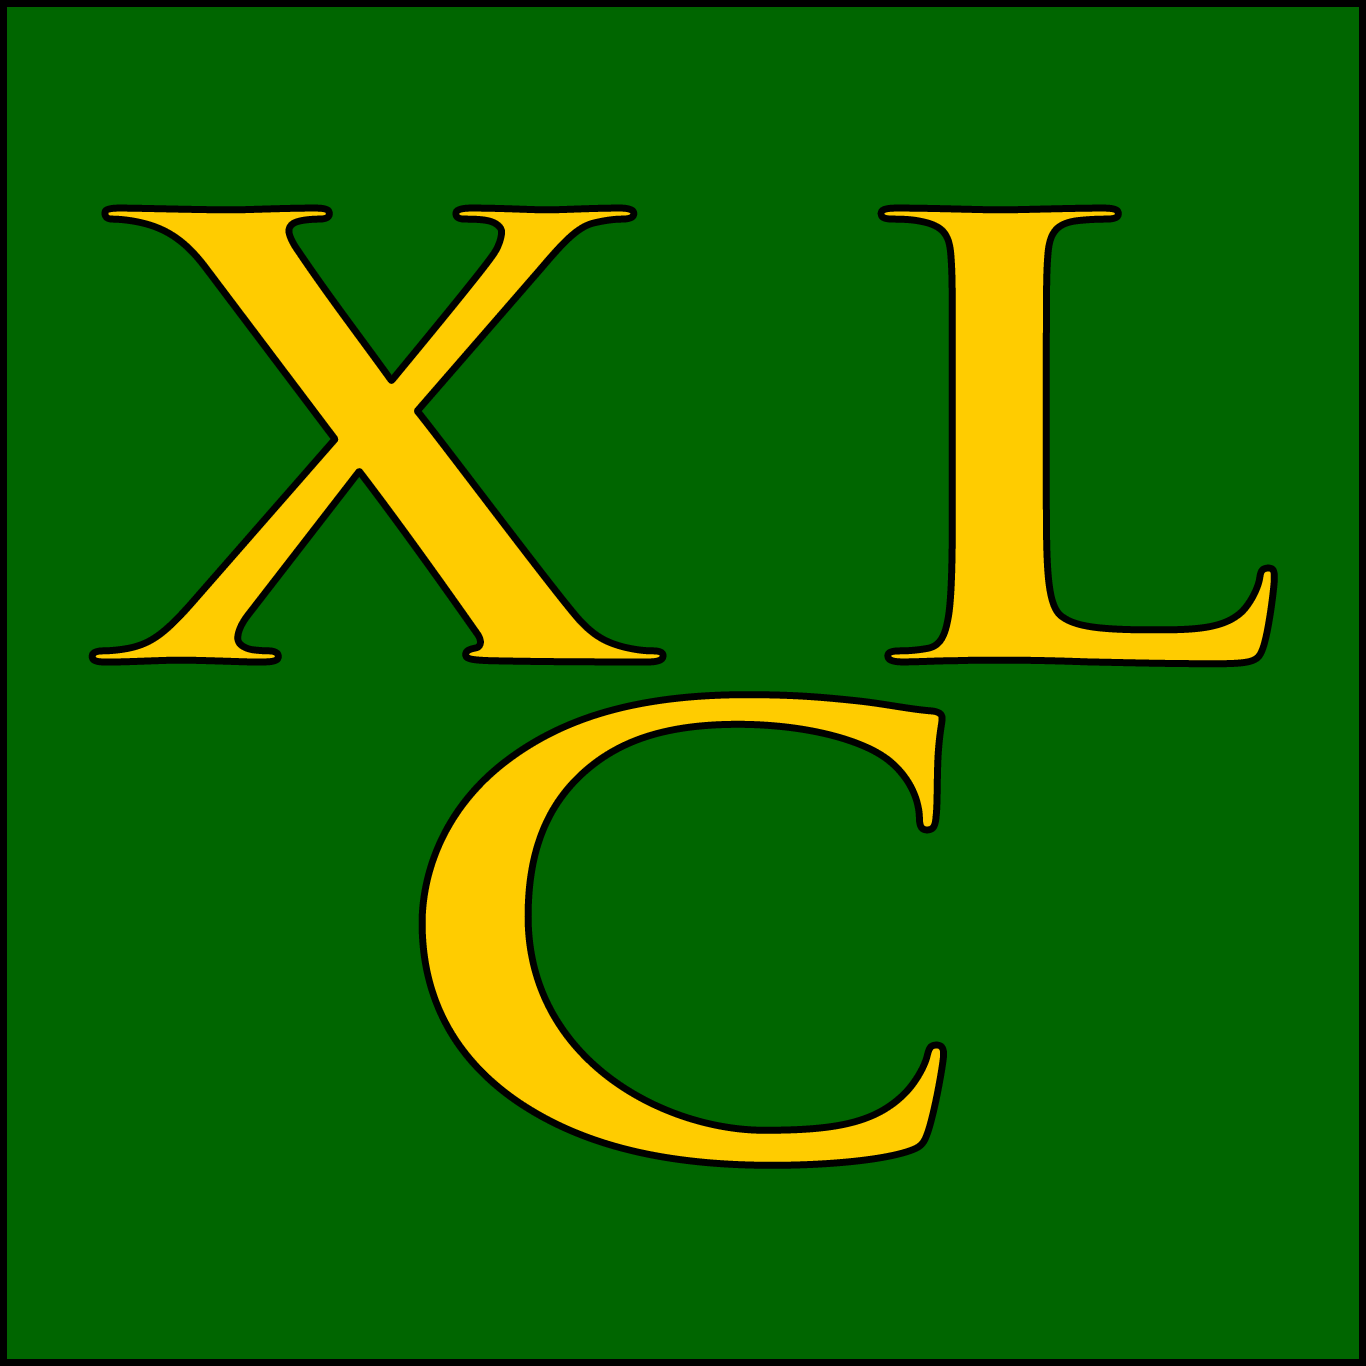 Vert, the letters X, L, C, two and one, Or.